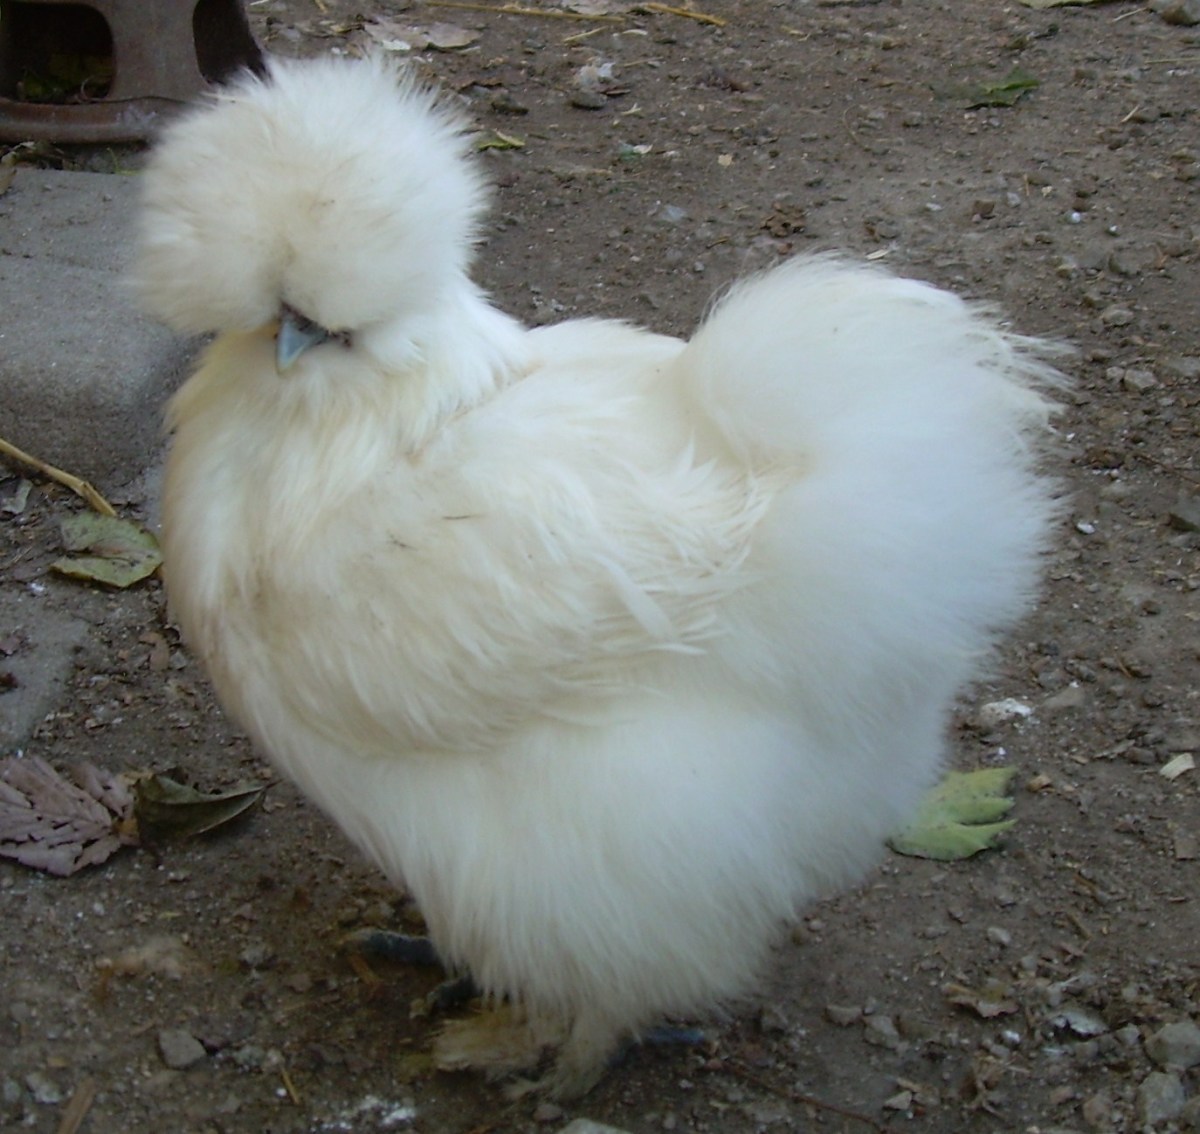 Information About the Furry Silkie Chicken